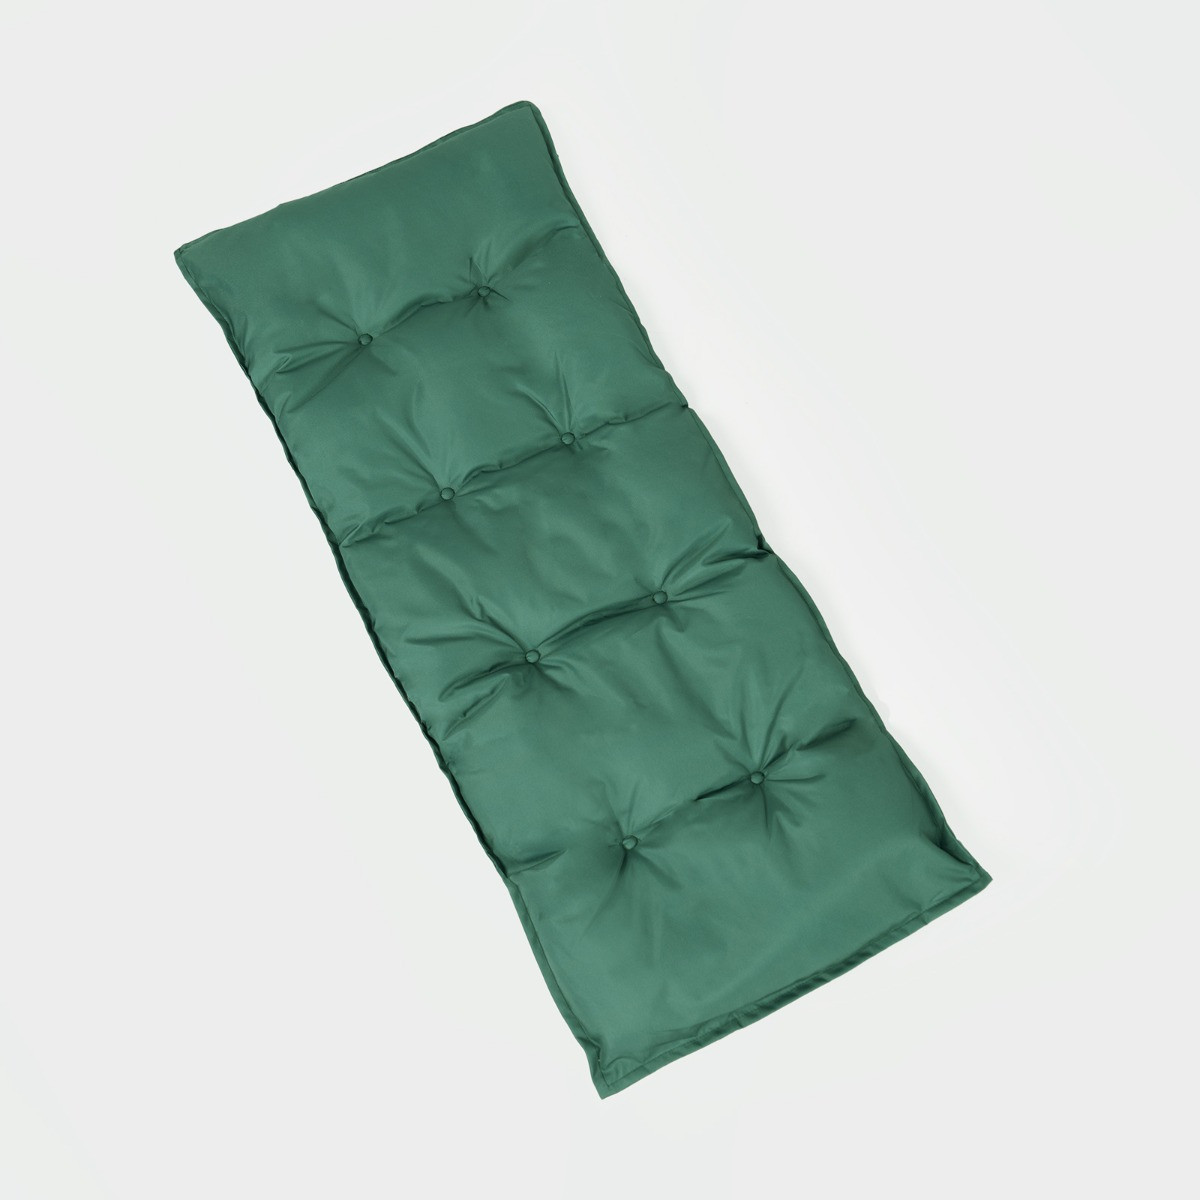 OHS 2 Seater Water Resistant Bench Pad, 110cm x 40cm - Forest Green>